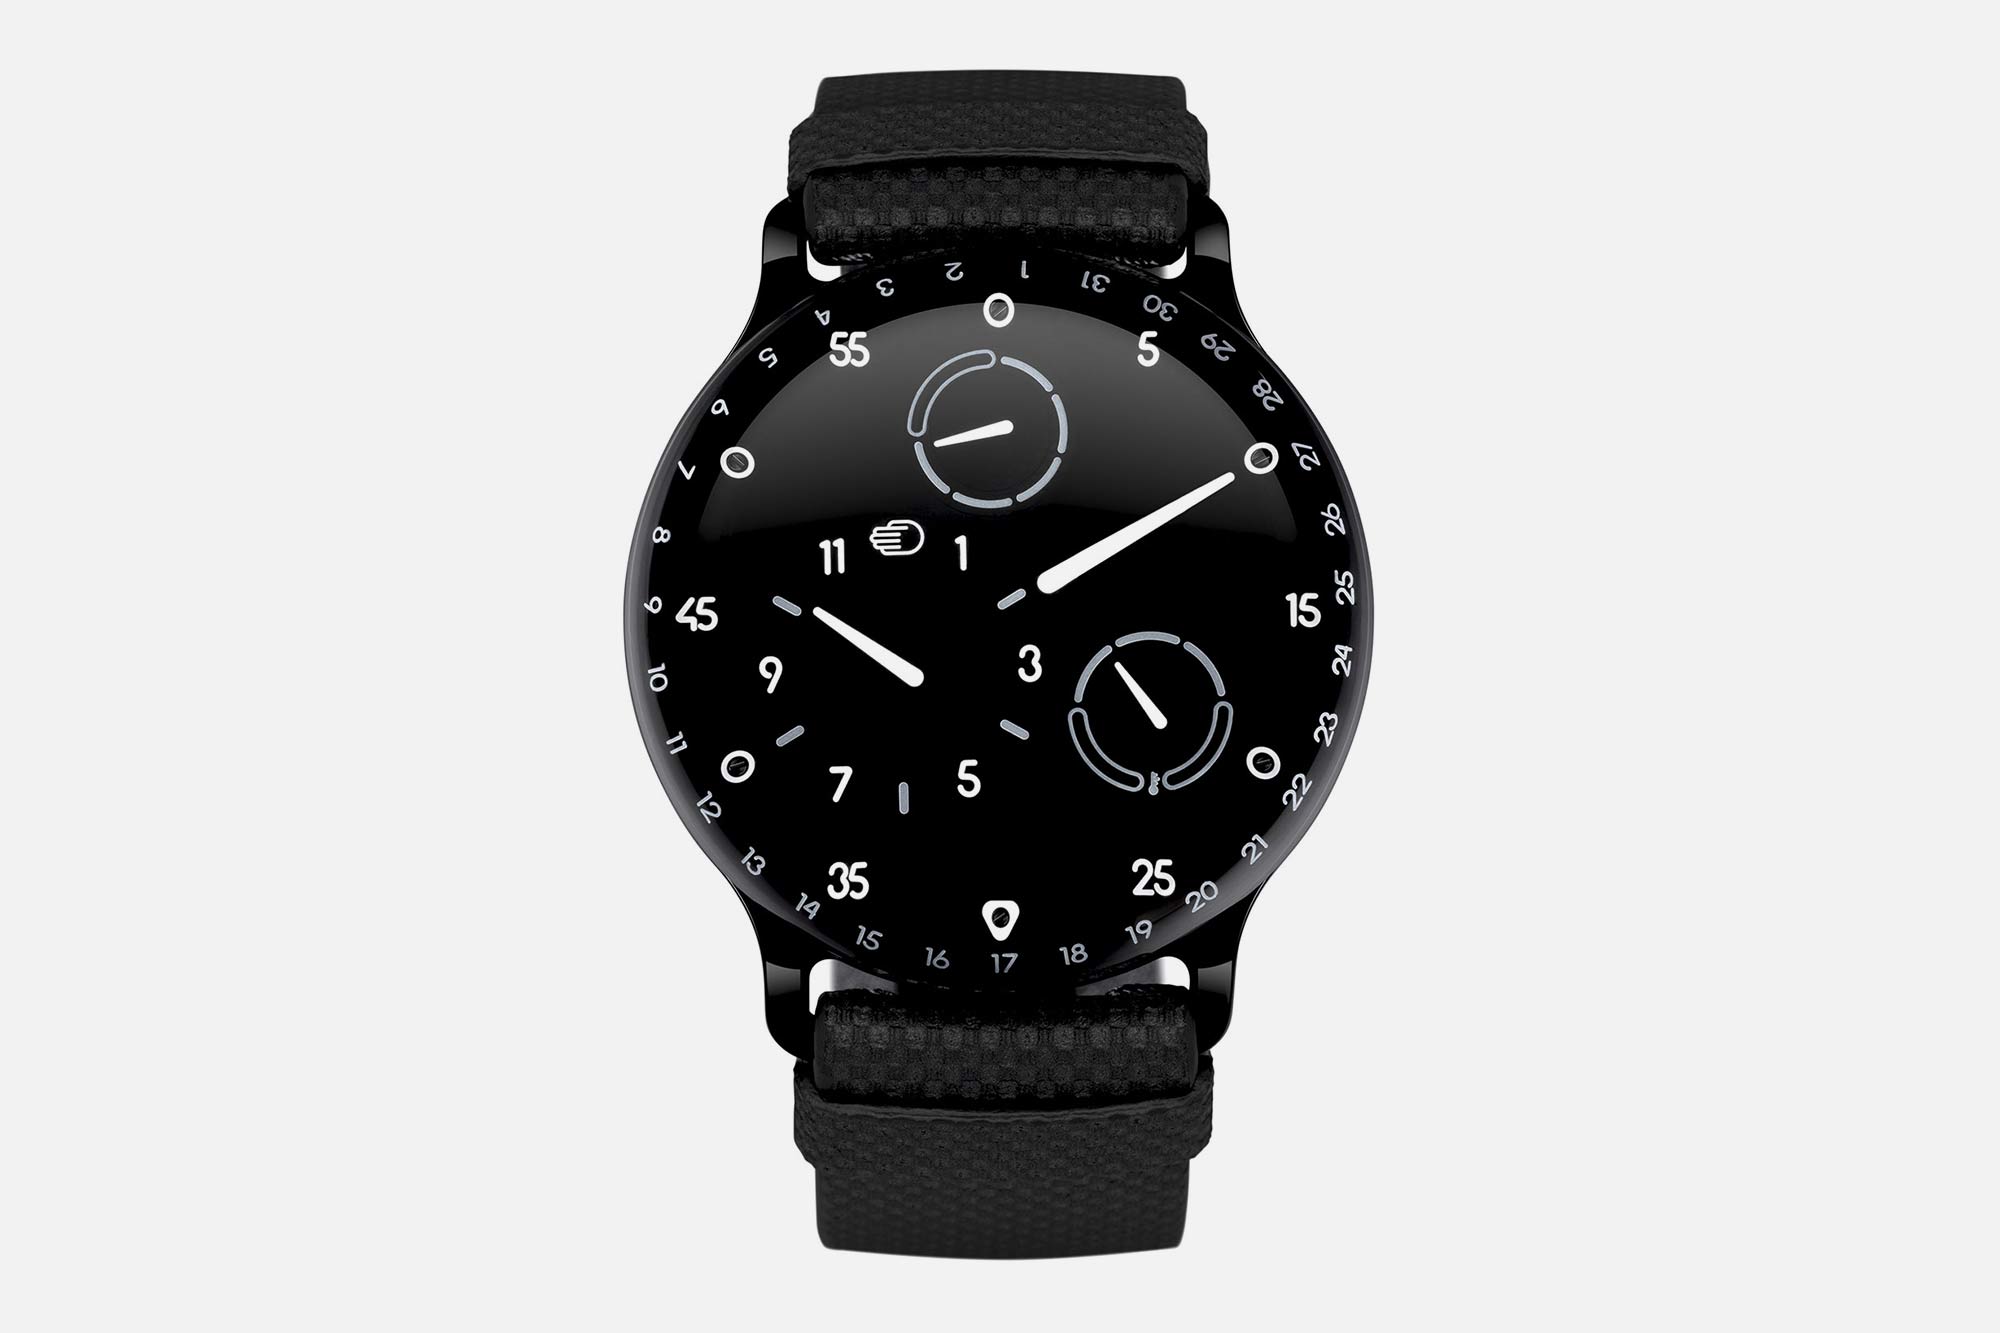 Ressence Introduces the Type 3BBB, the Latest Version of their Oil Filled Sports Watch